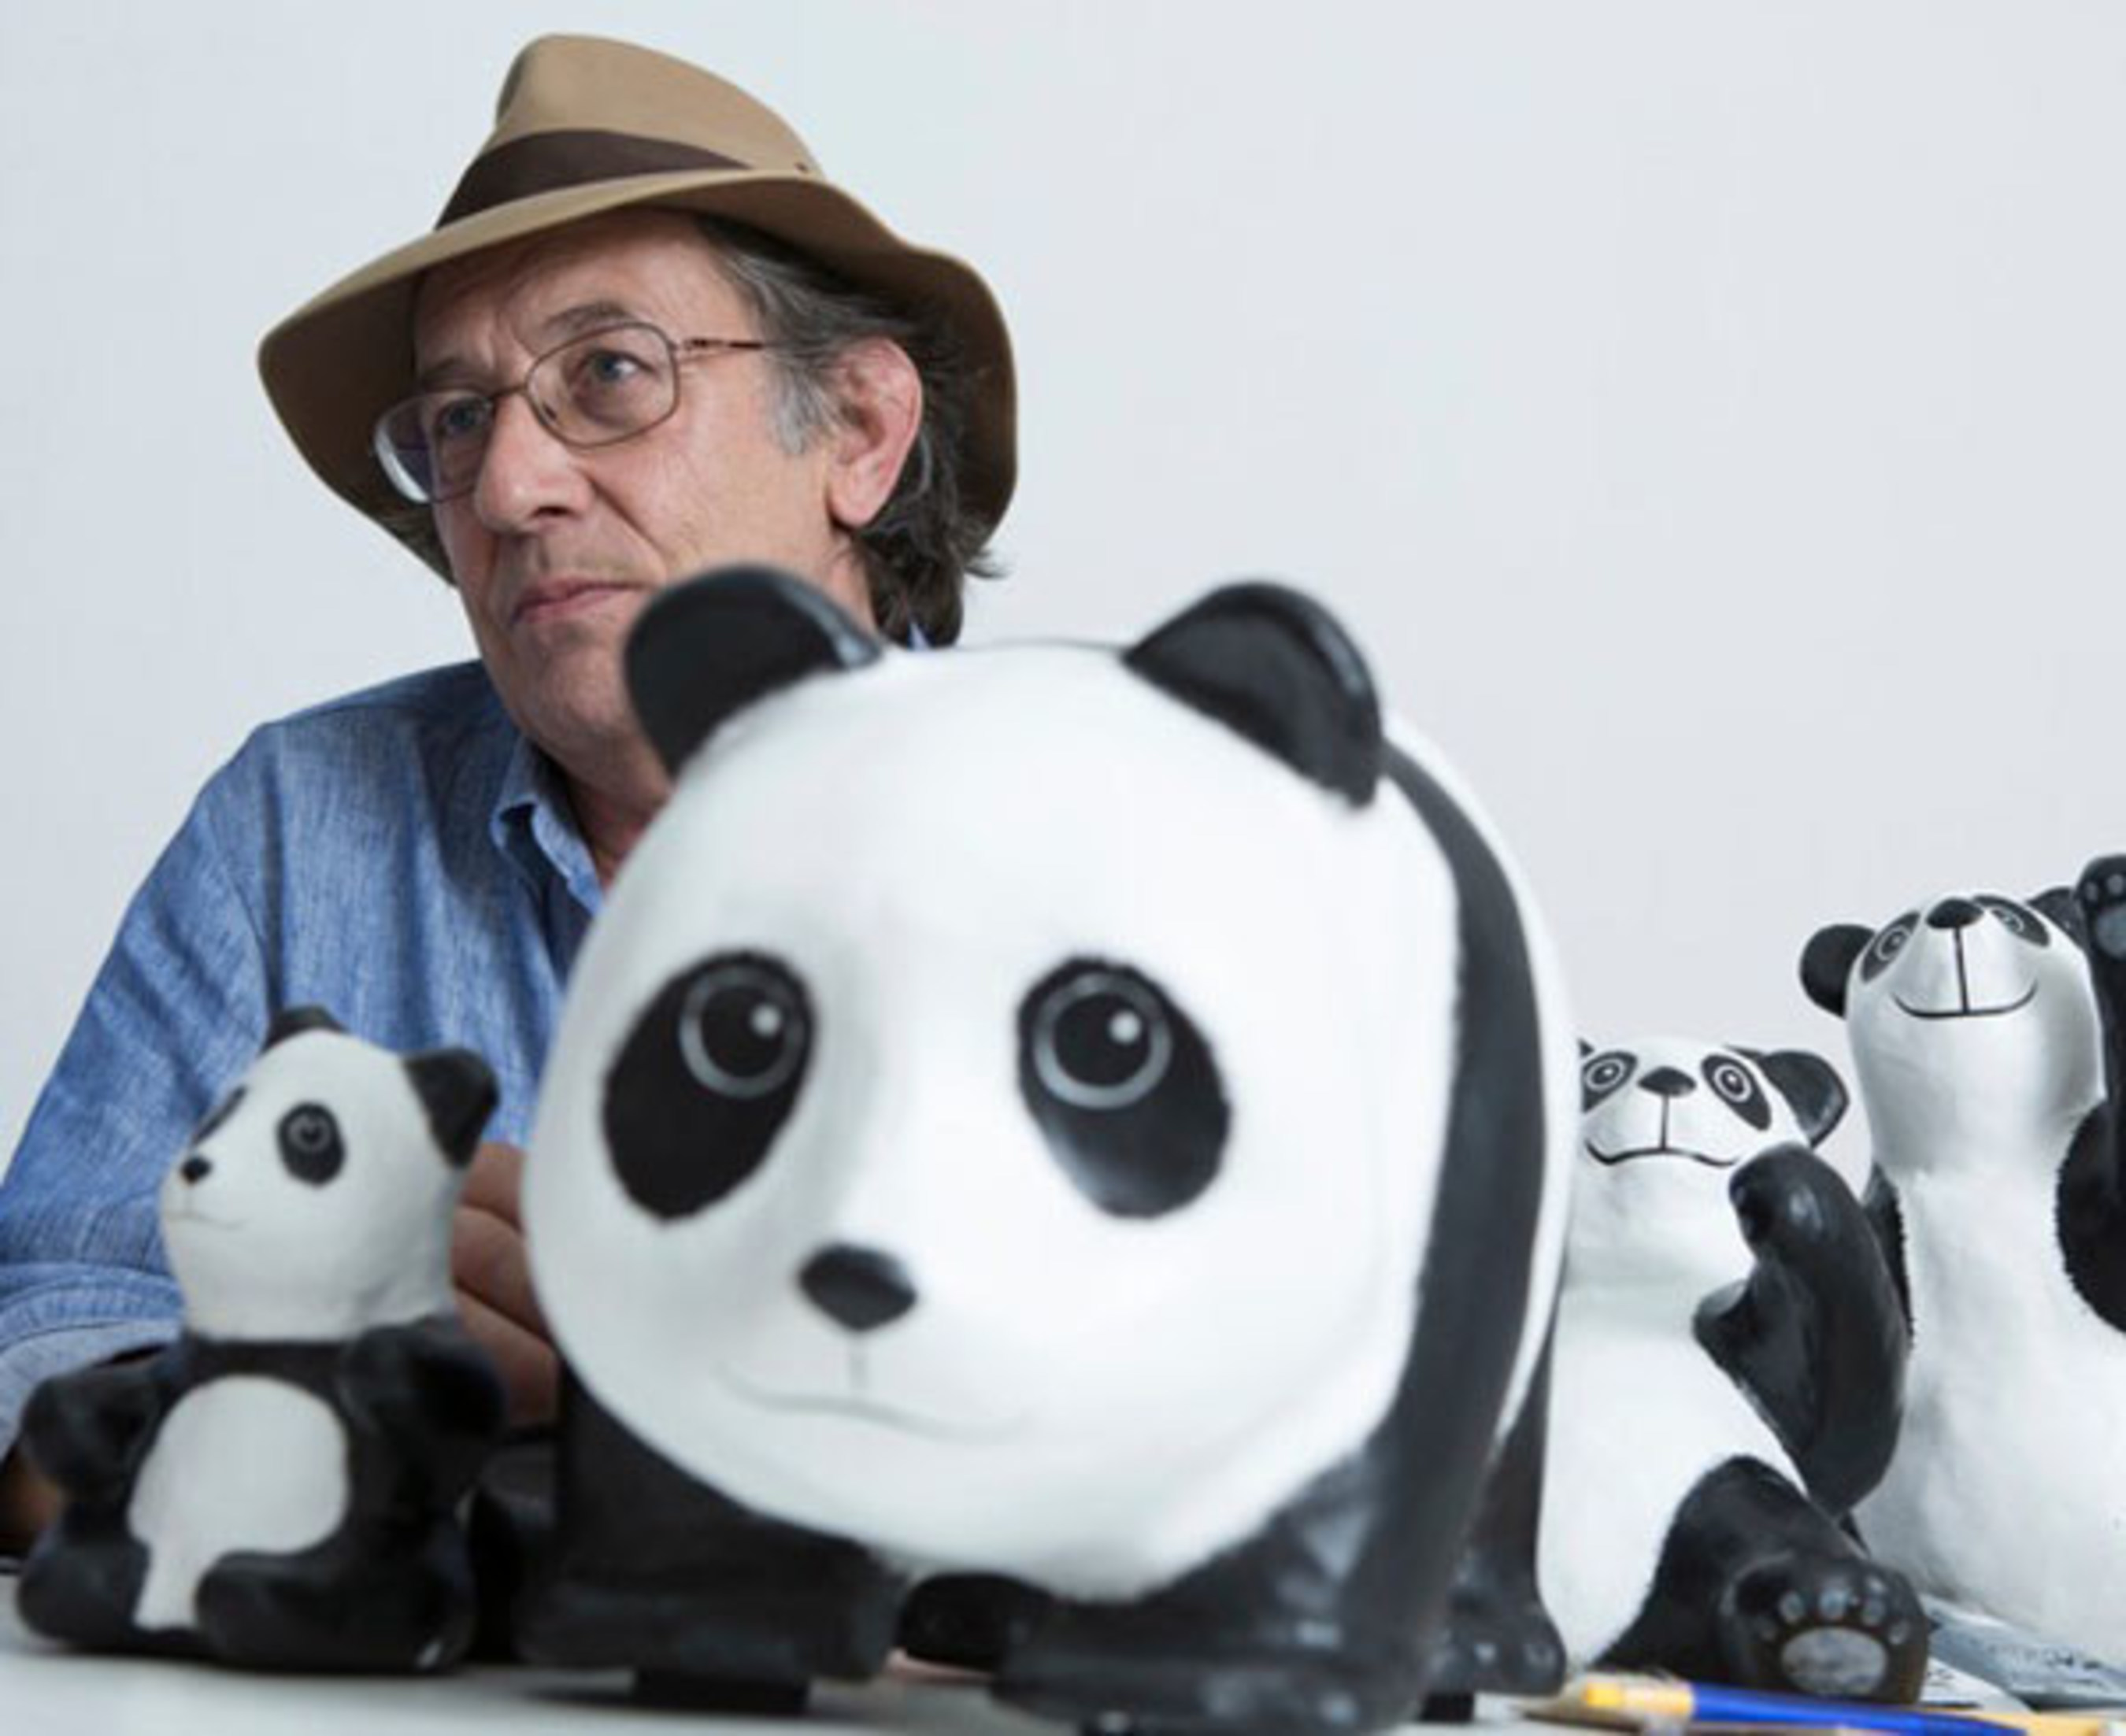 The Father of the 1600 Pandas! Paulo Grangeon, acclaimed French sculpture artist and designer with more than 30 years of experiences posing with his beloved Pandas, each with its very own unique expression.